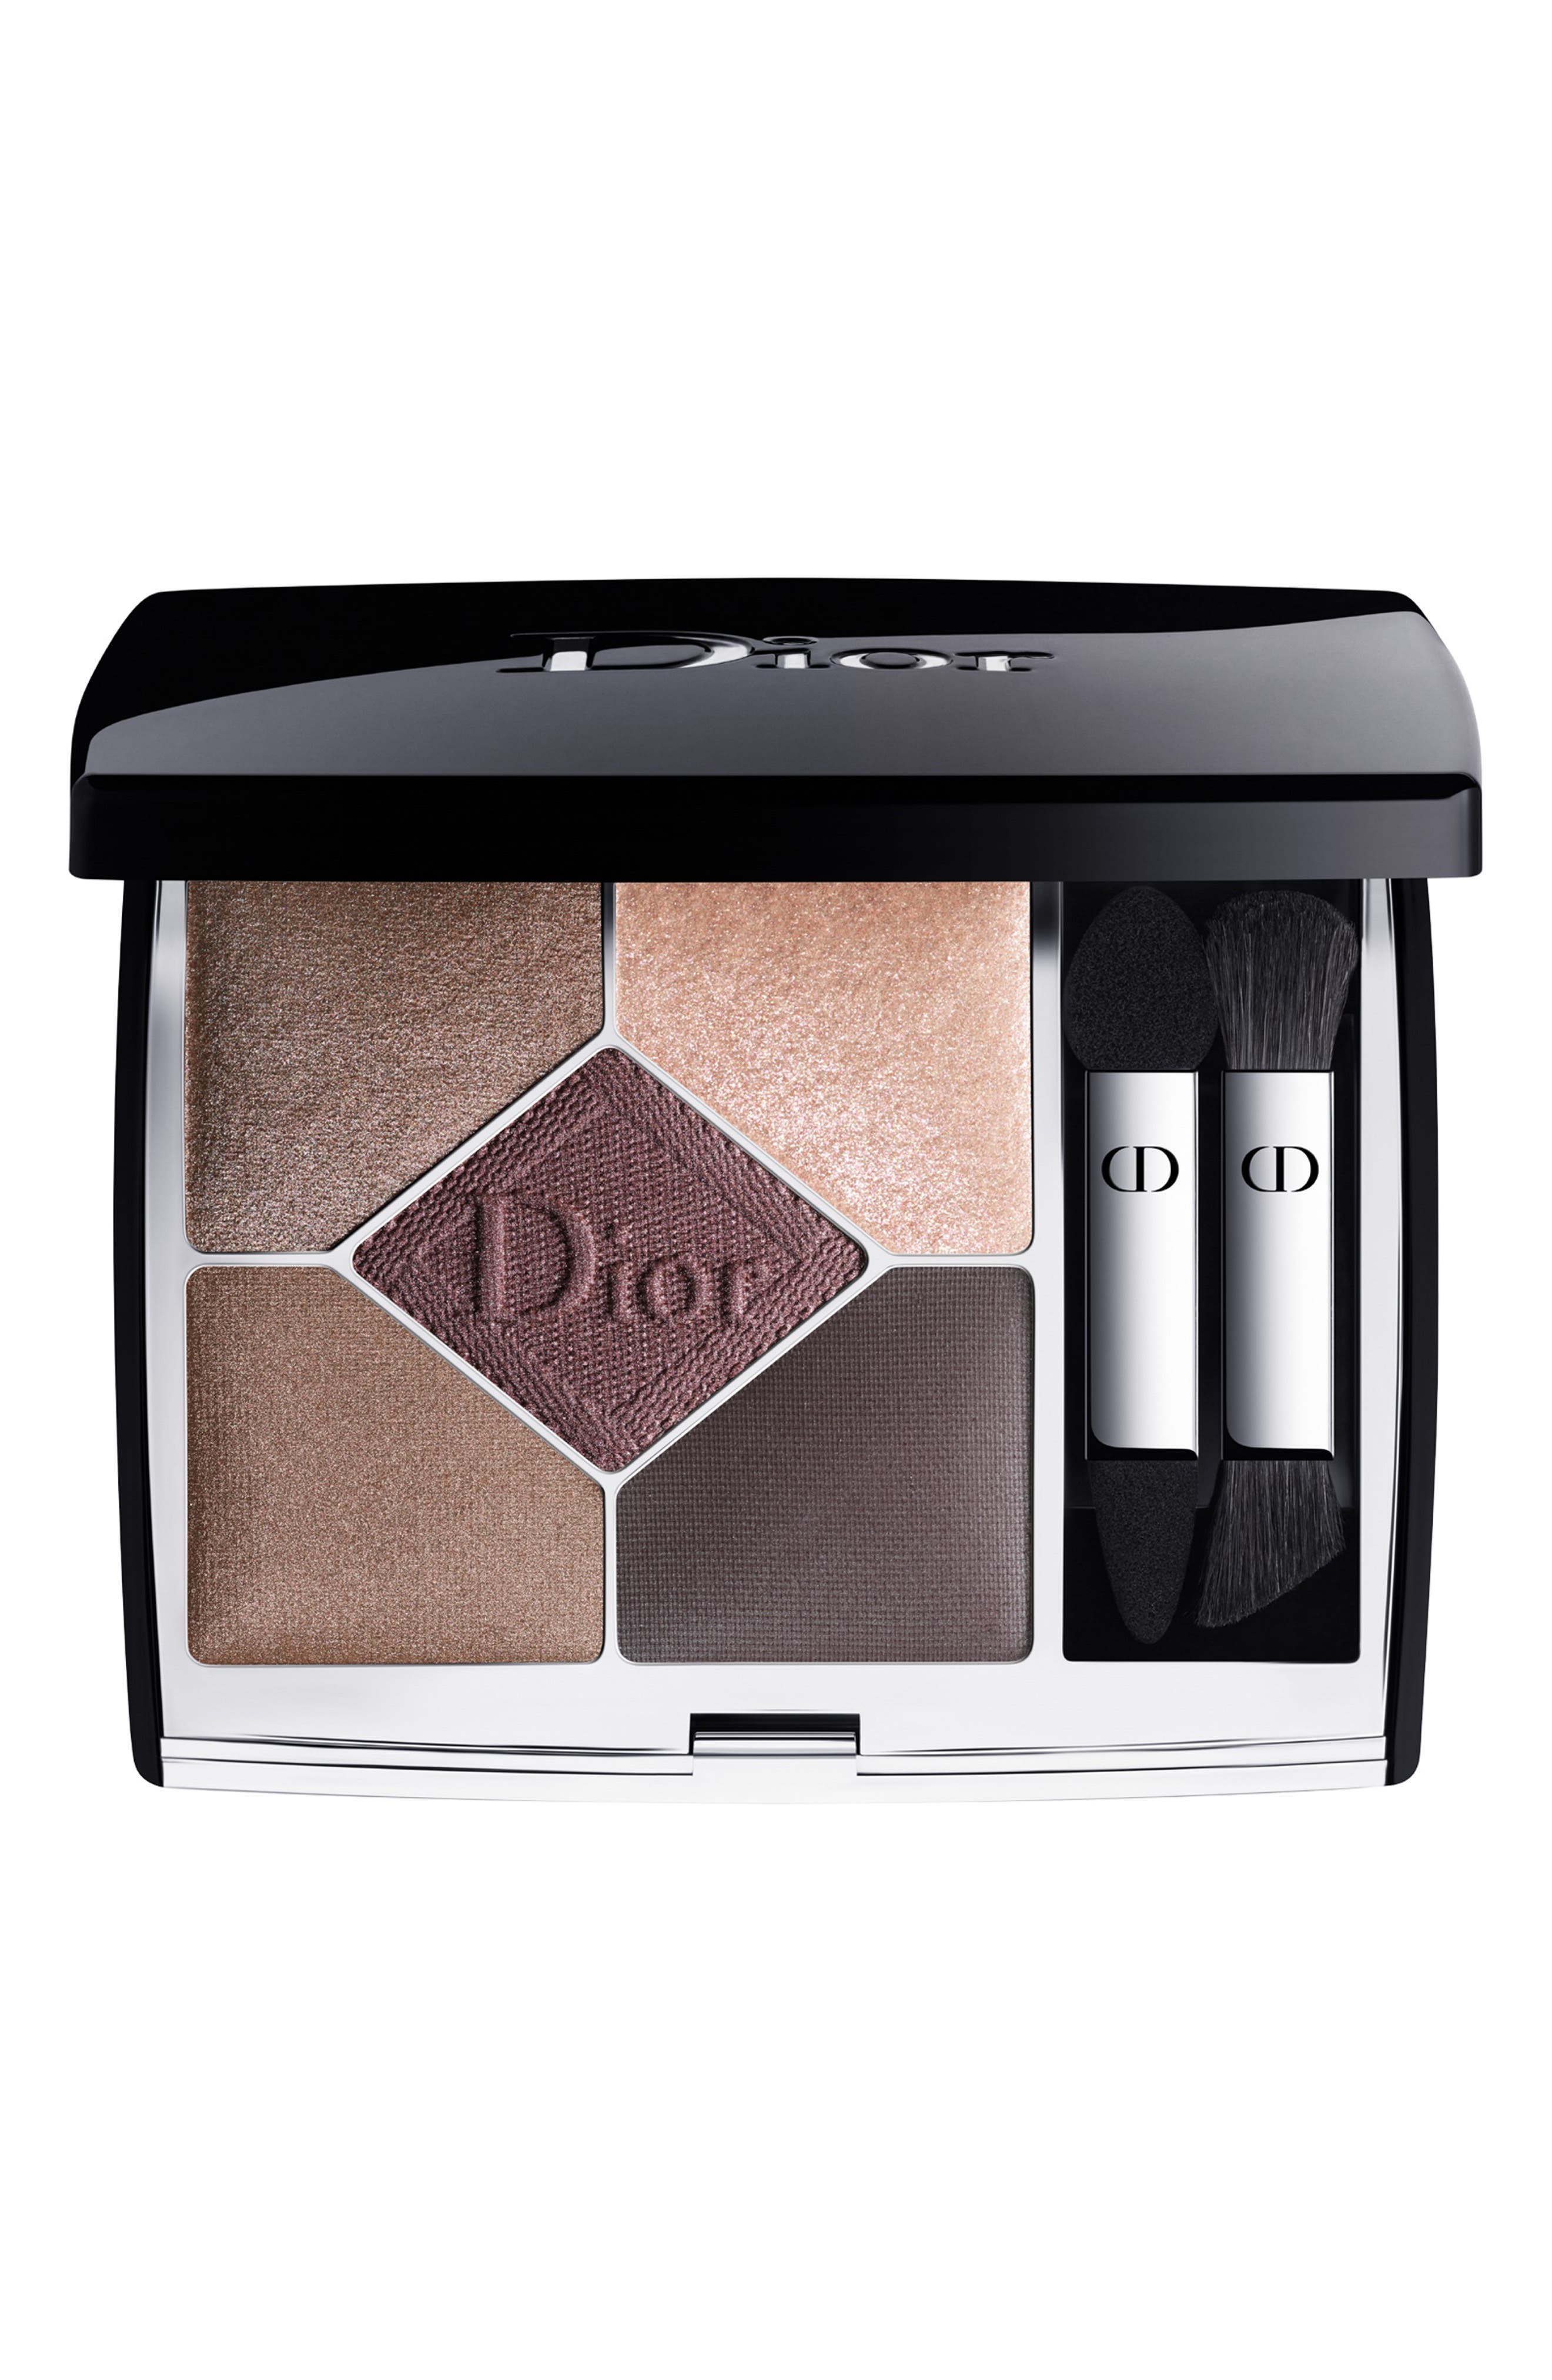 Dior 5 Couleurs Couture Eyeshadow Palette in 599 New Look